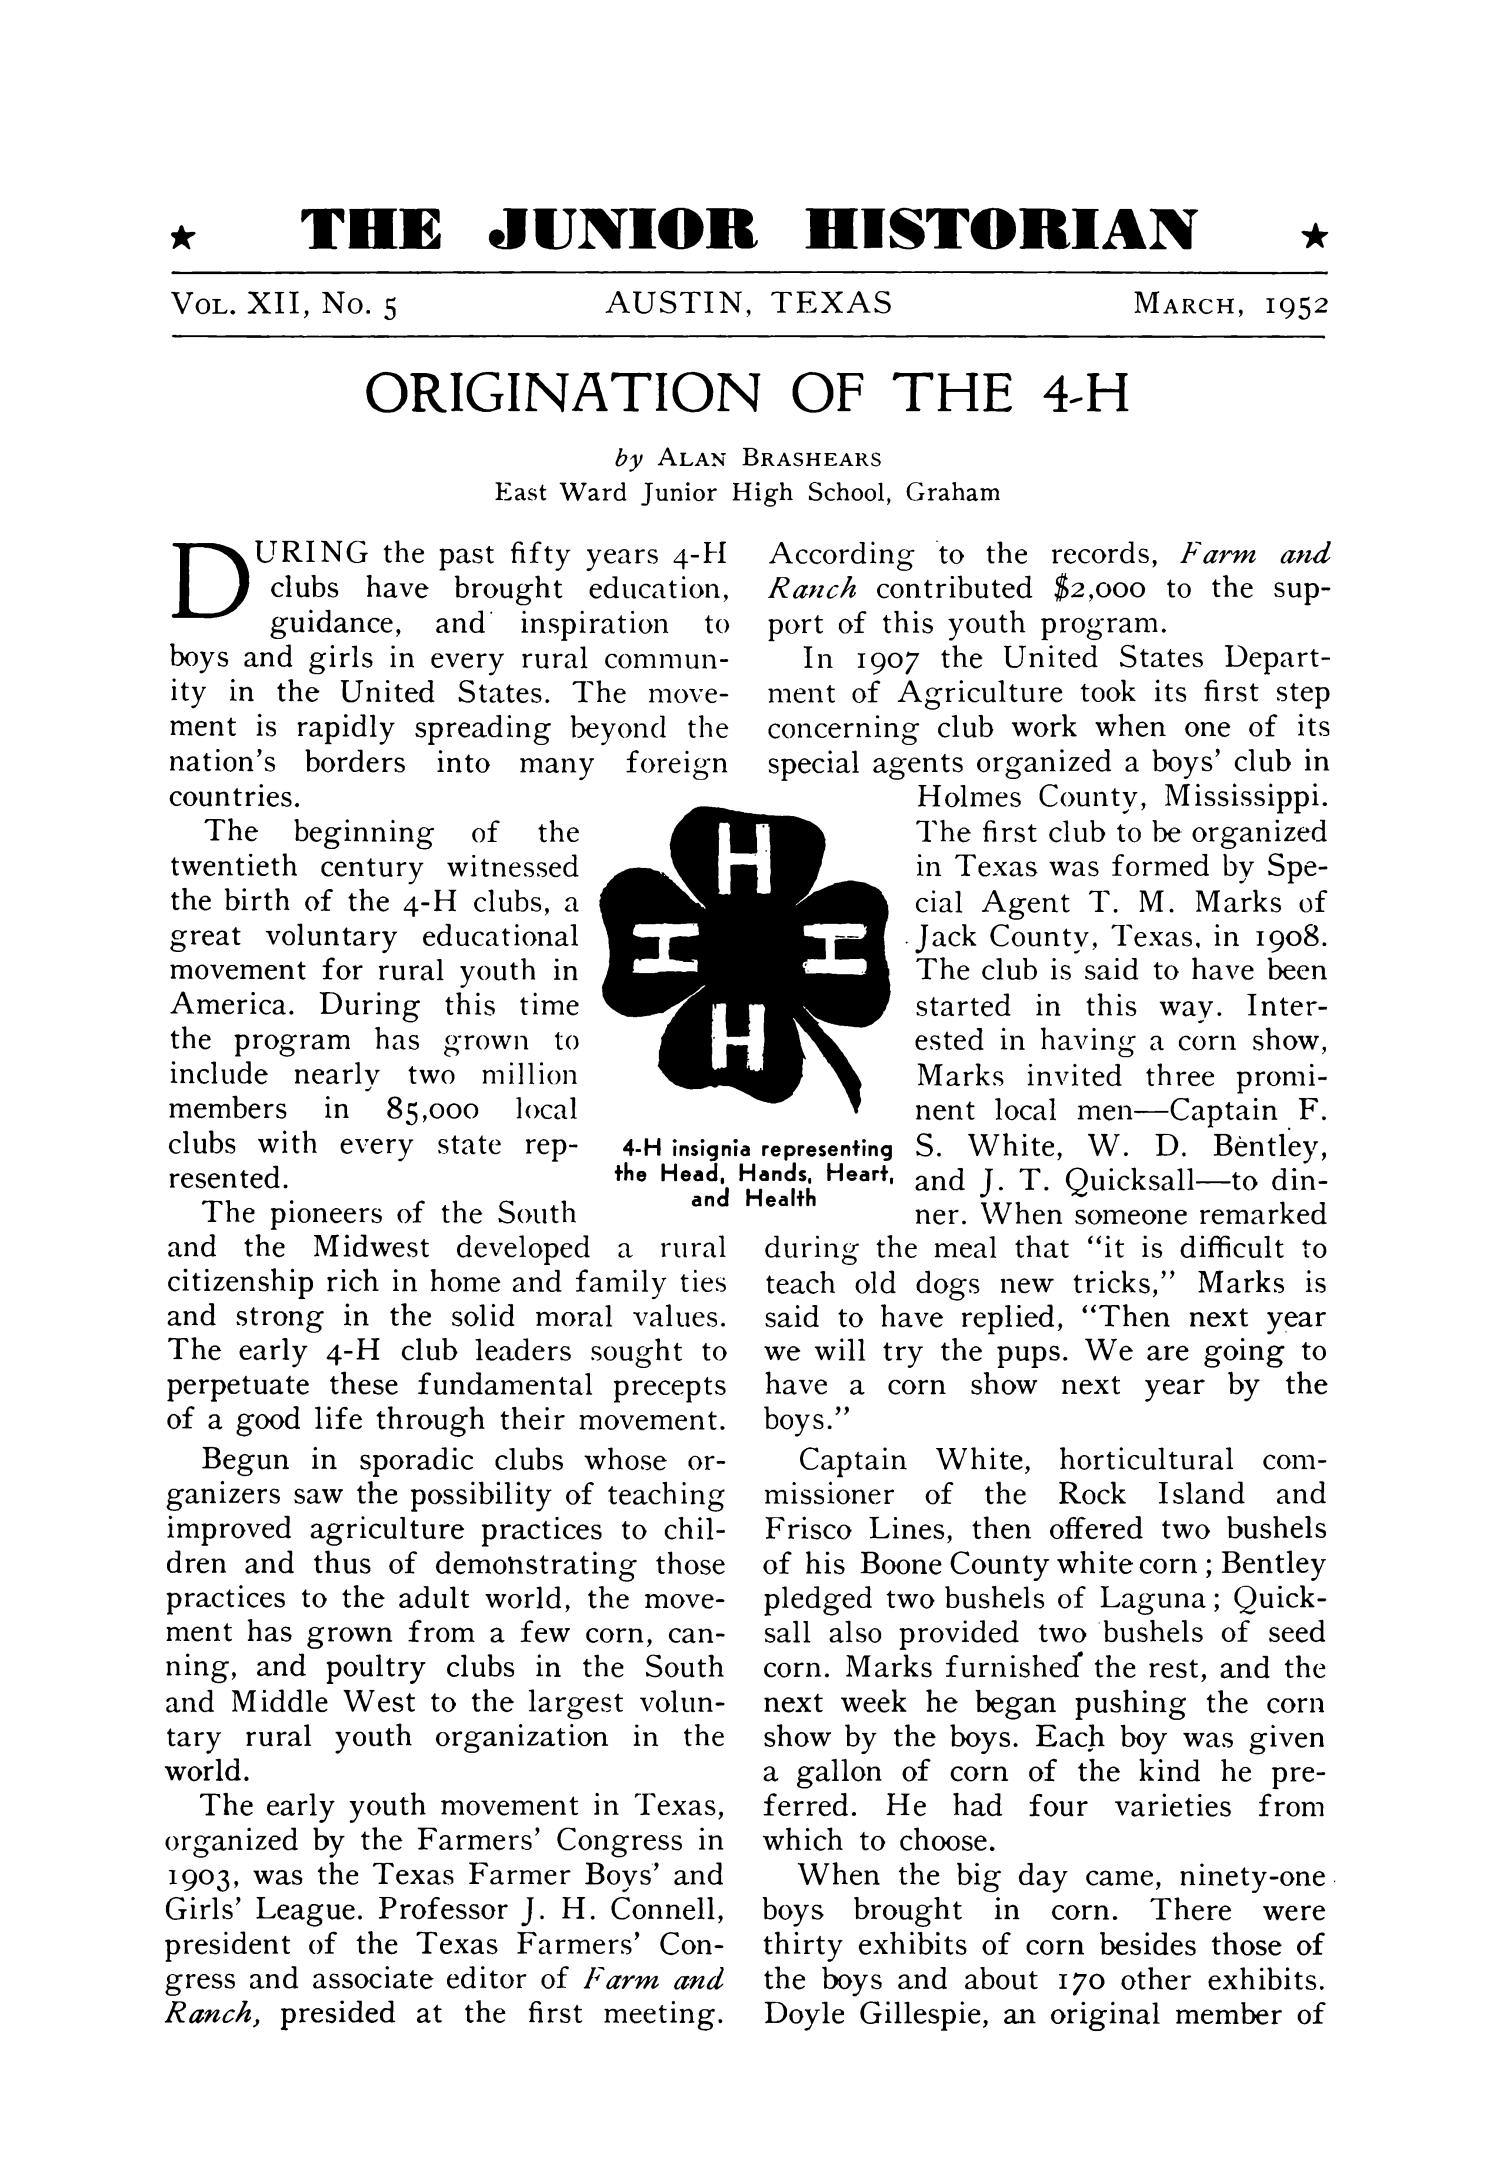 The Junior Historian, Volume 12, Number 5, March 1952
                                                
                                                    1
                                                